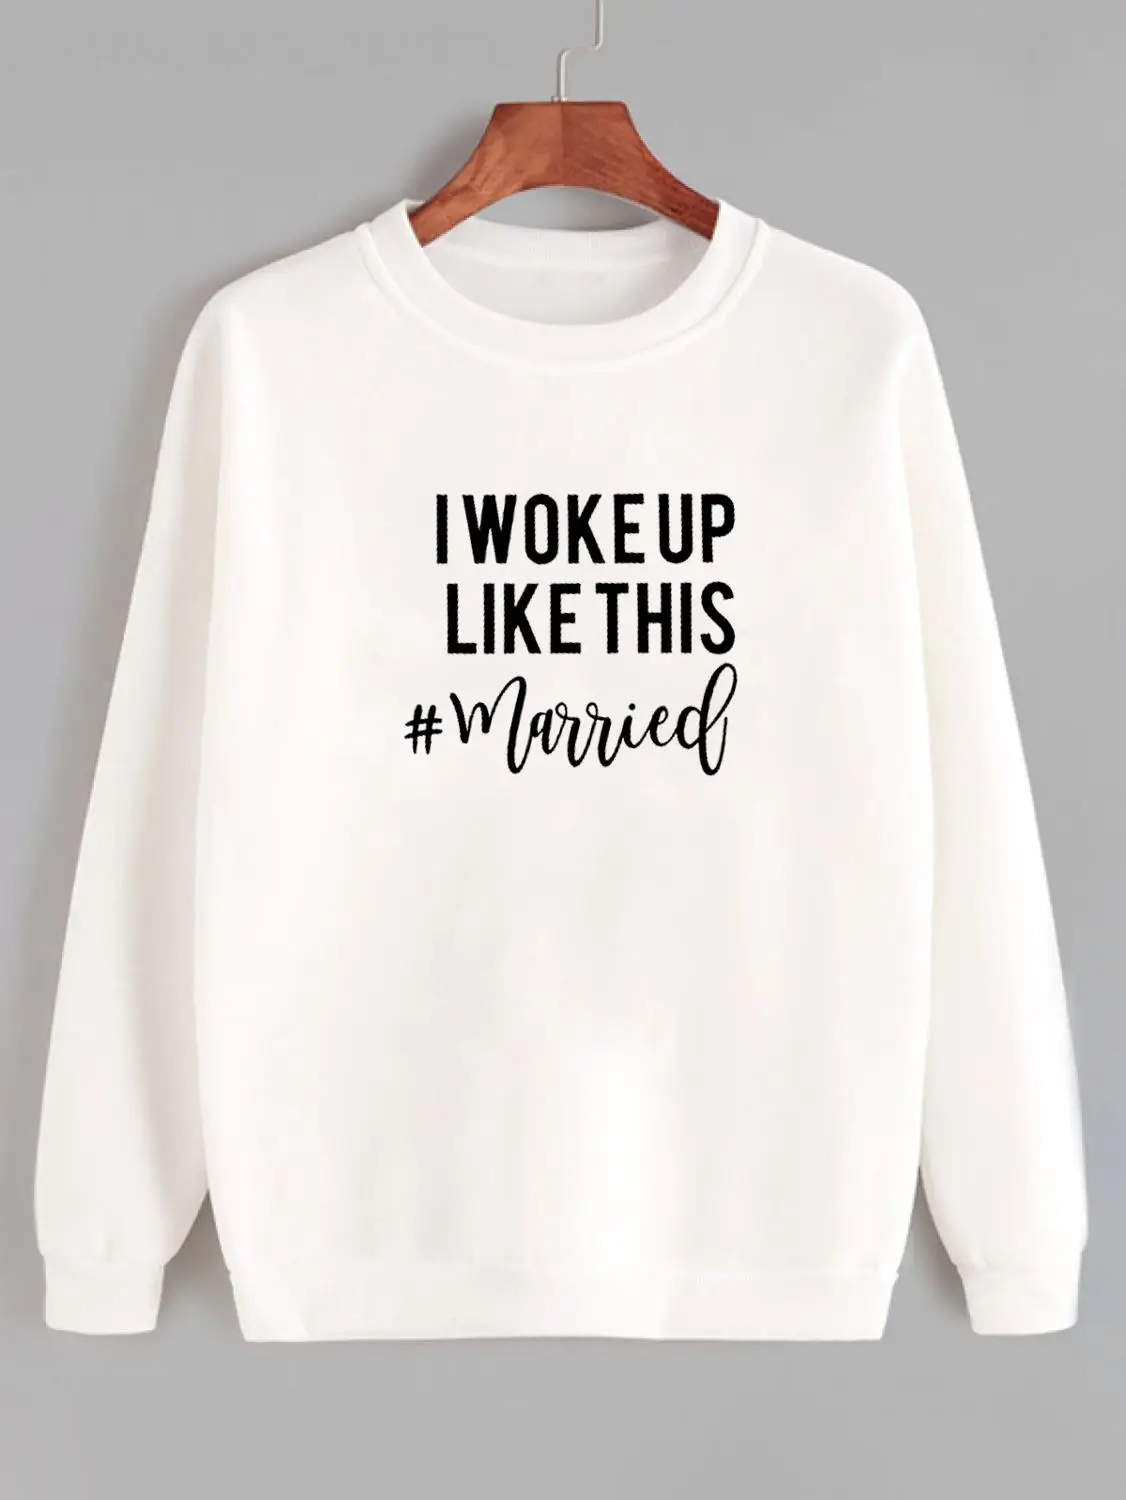 

Sweatshirt I Woke Up Like This Printed New Arrival Women Funny Long Sleeve Casual Cotton Tops just Married Shirt Bride Gift